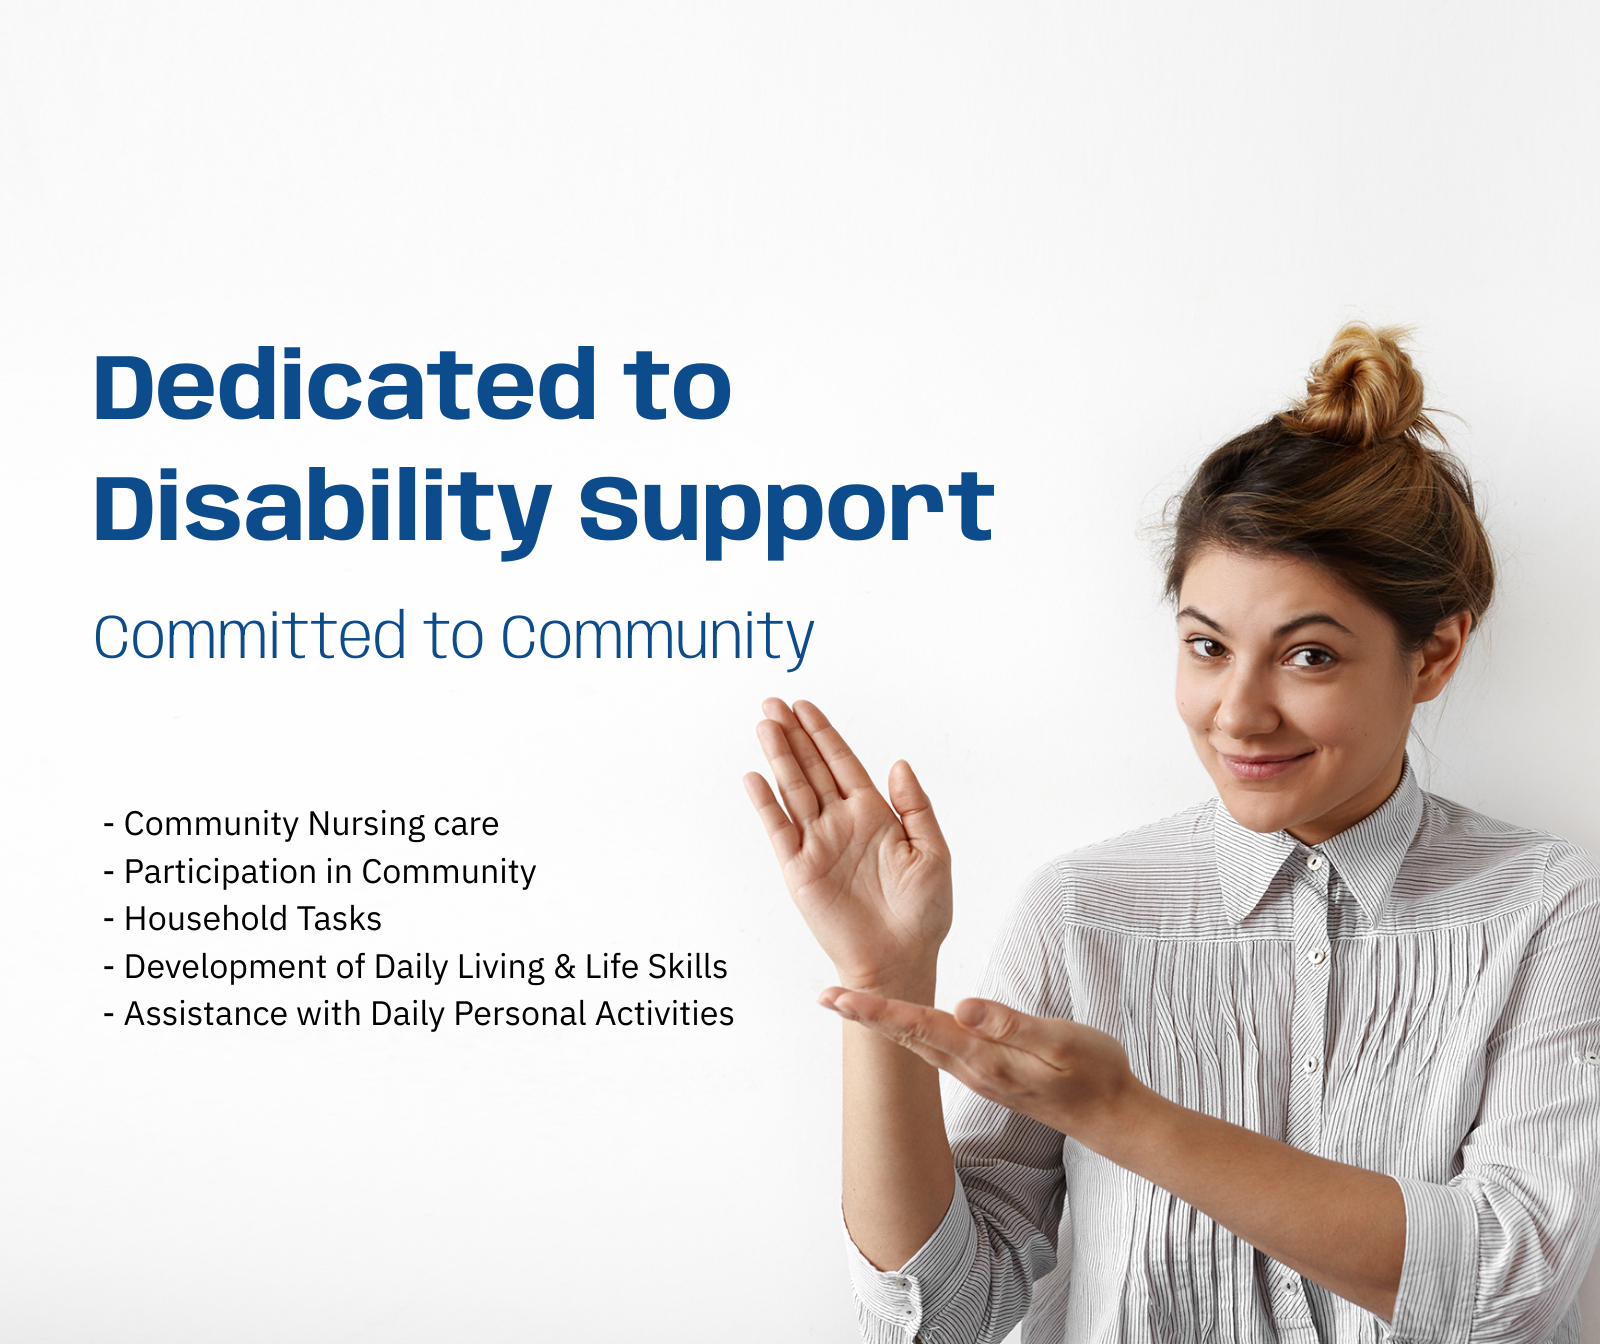 Symbolic image representing dedication to disability support and commitment to the community